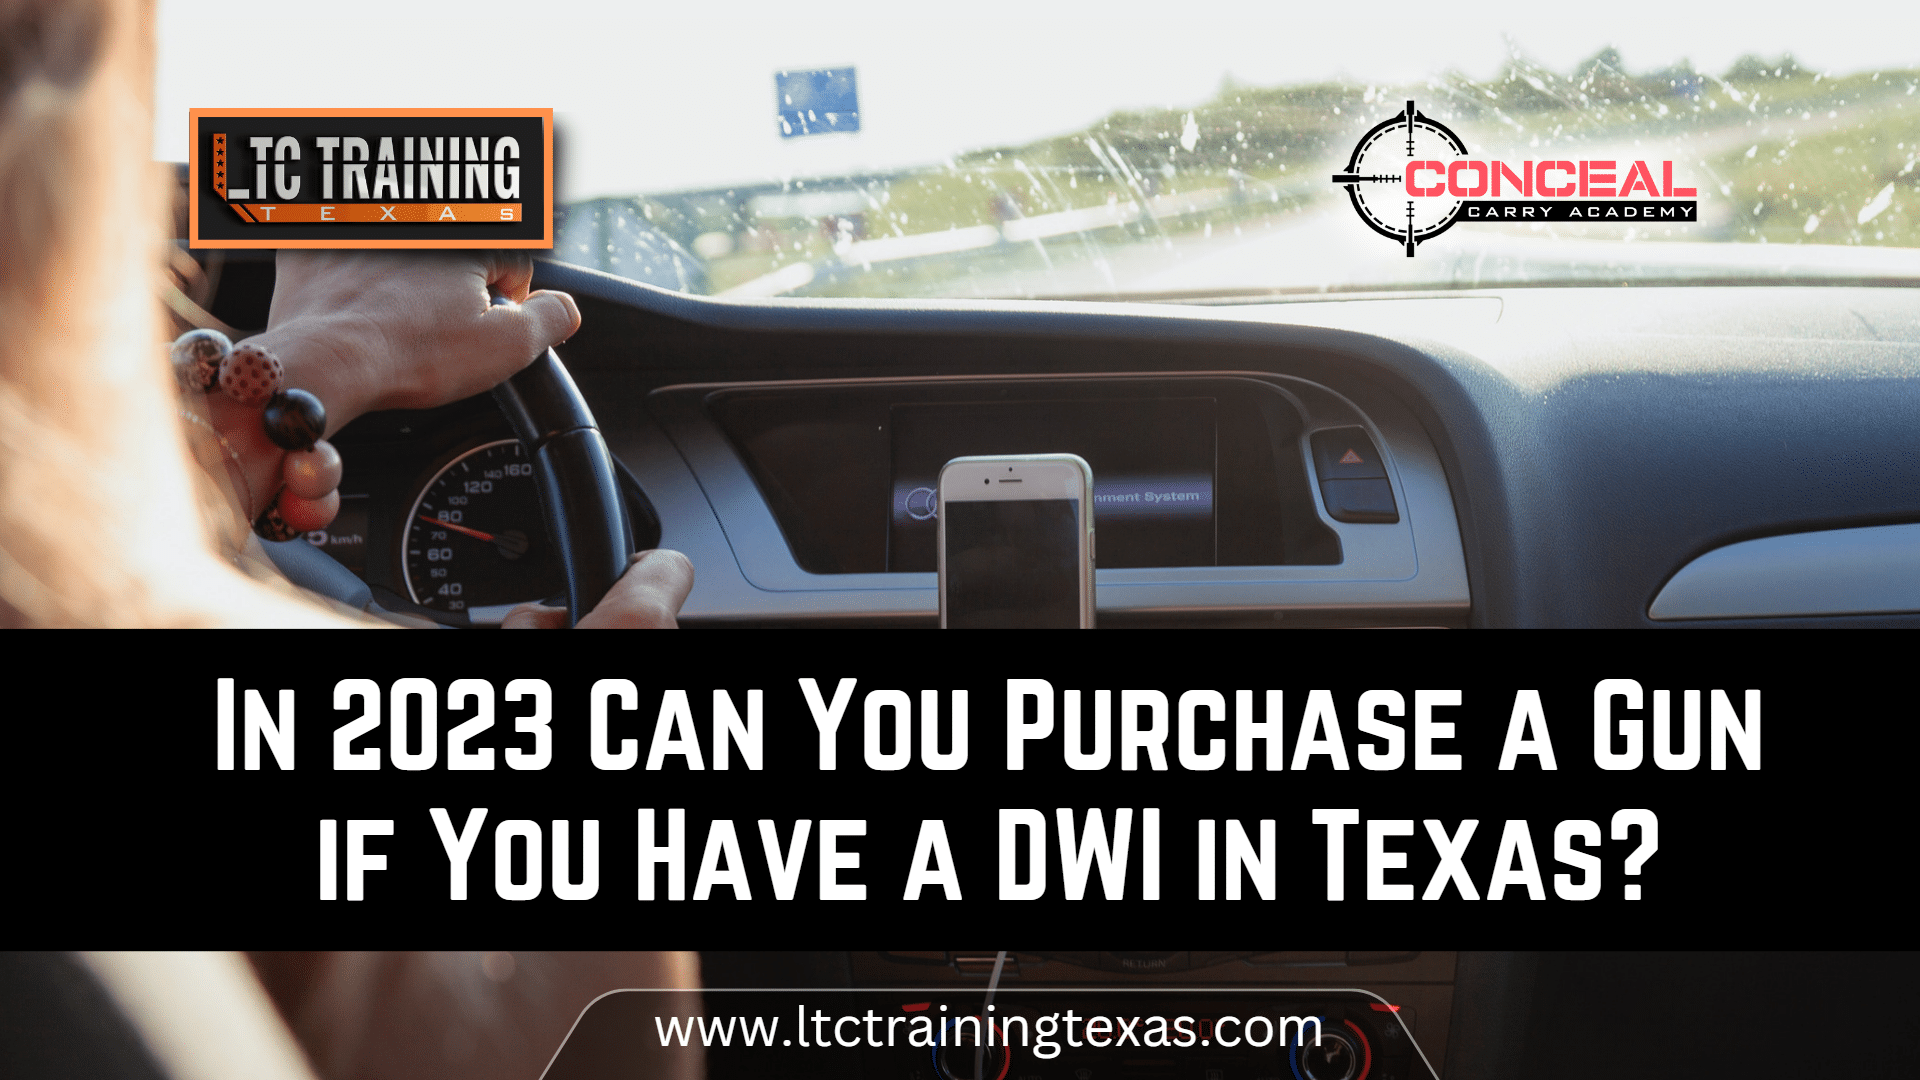 You are currently viewing In 2023 Can You Purchase a Gun if You Have a DWI in Texas?